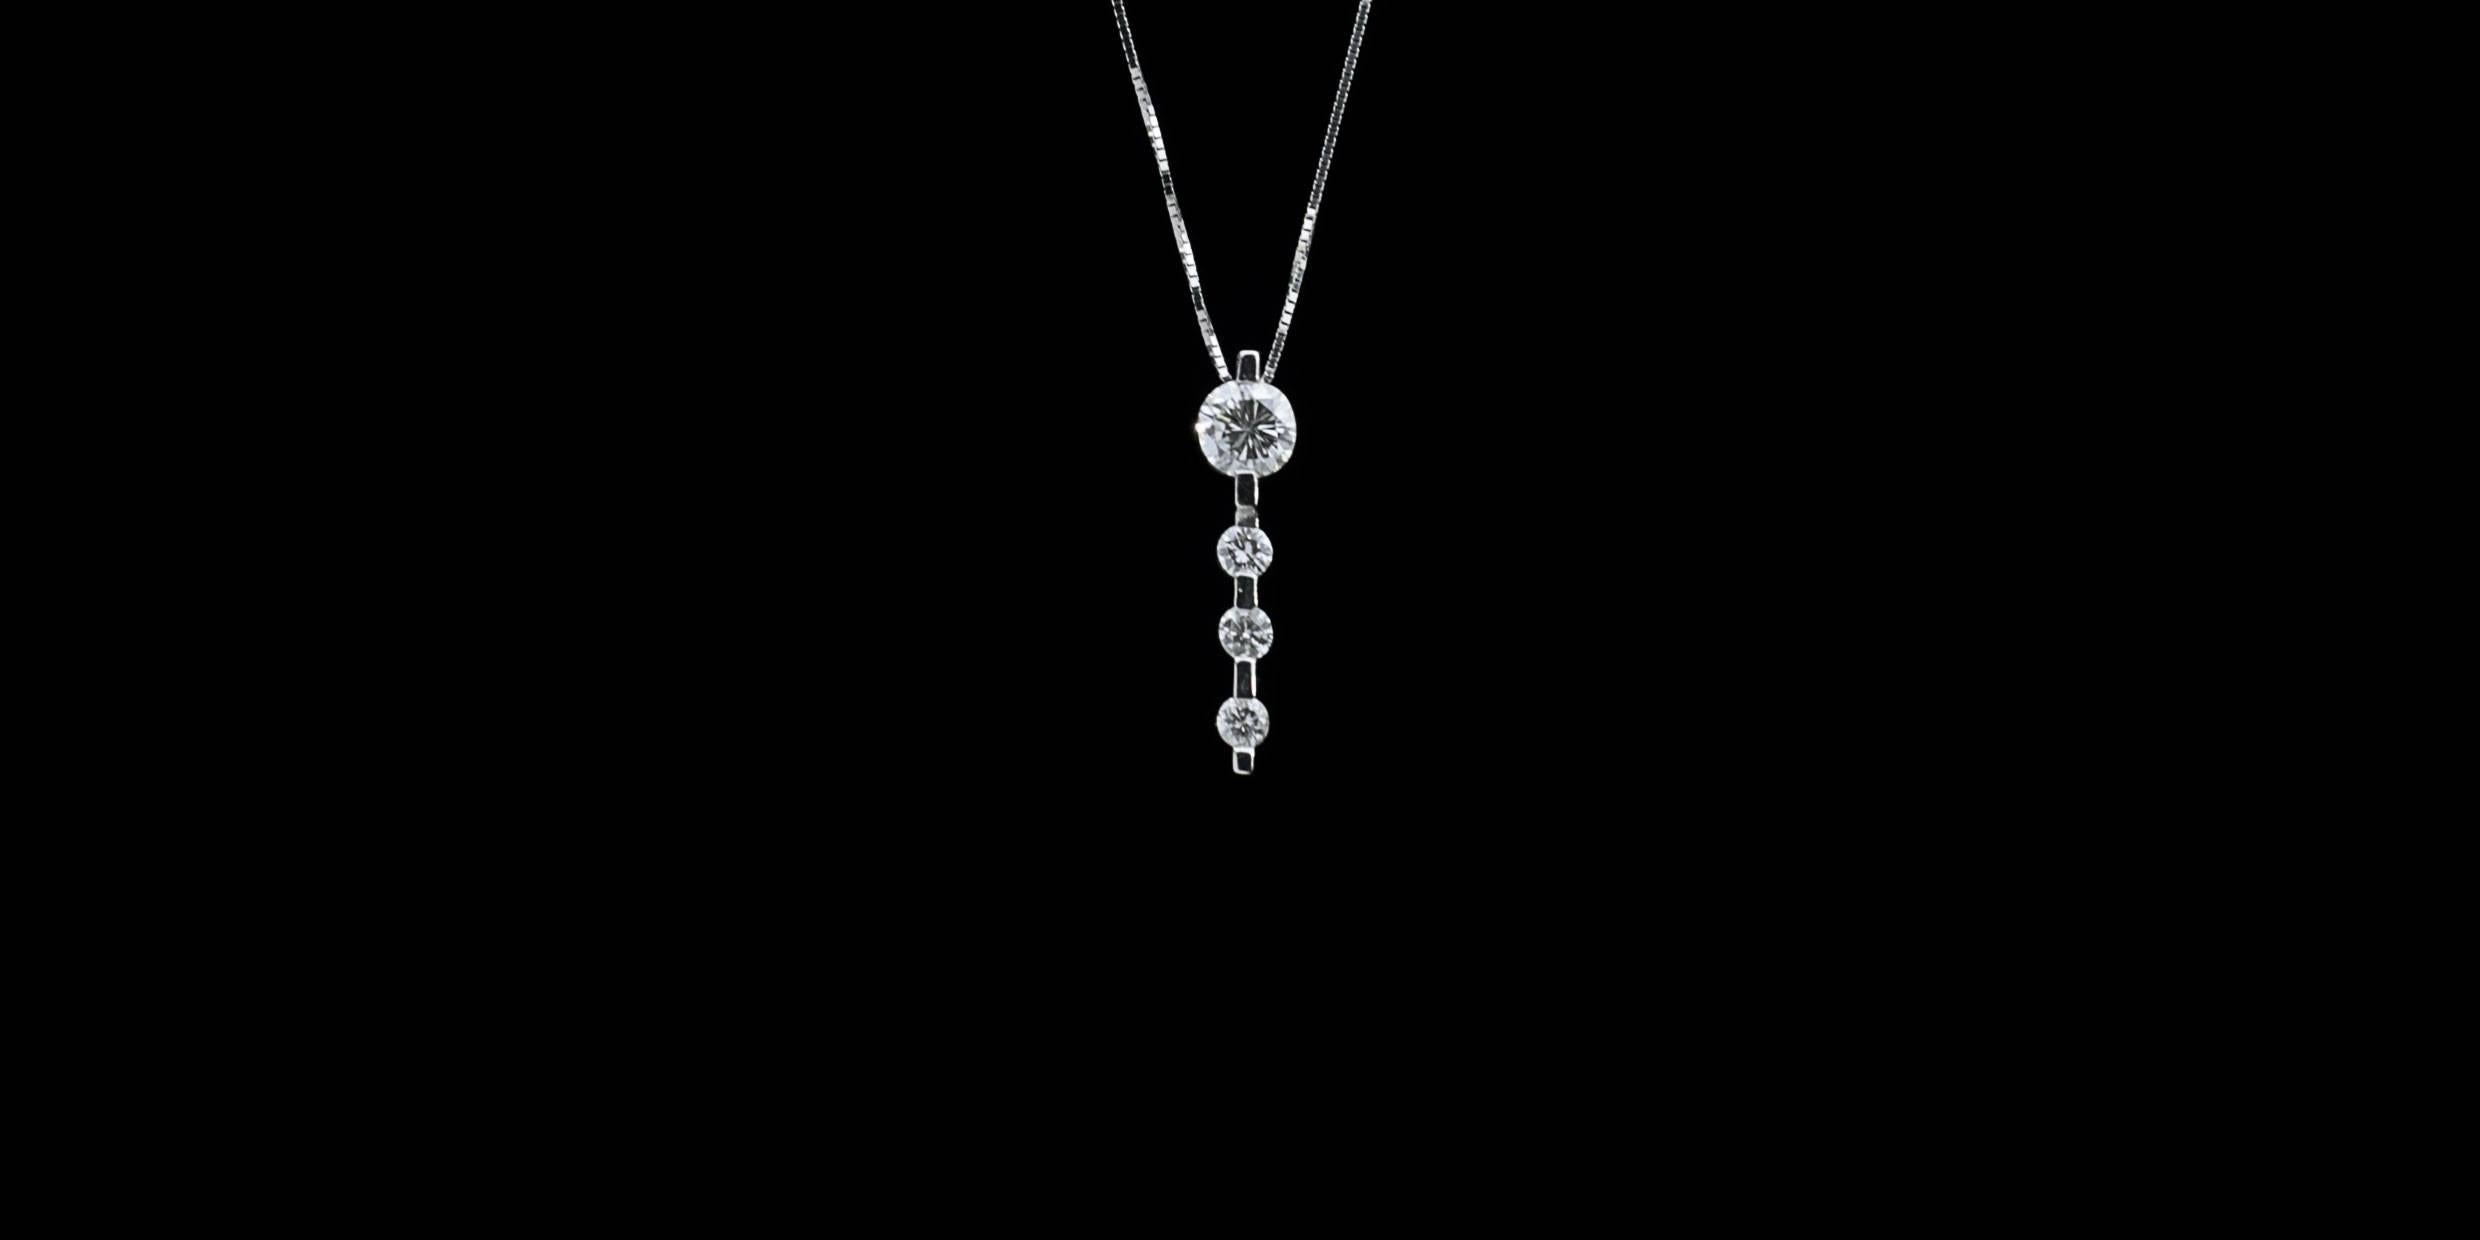 Simple yet elegant & beautiful would be the best way to describe this stunning pendant! It features 4 sparkly, round brilliant diamonds that have a combined total weight of .56 carats & grade as GH/SI in quality. The diamonds are channel set in a